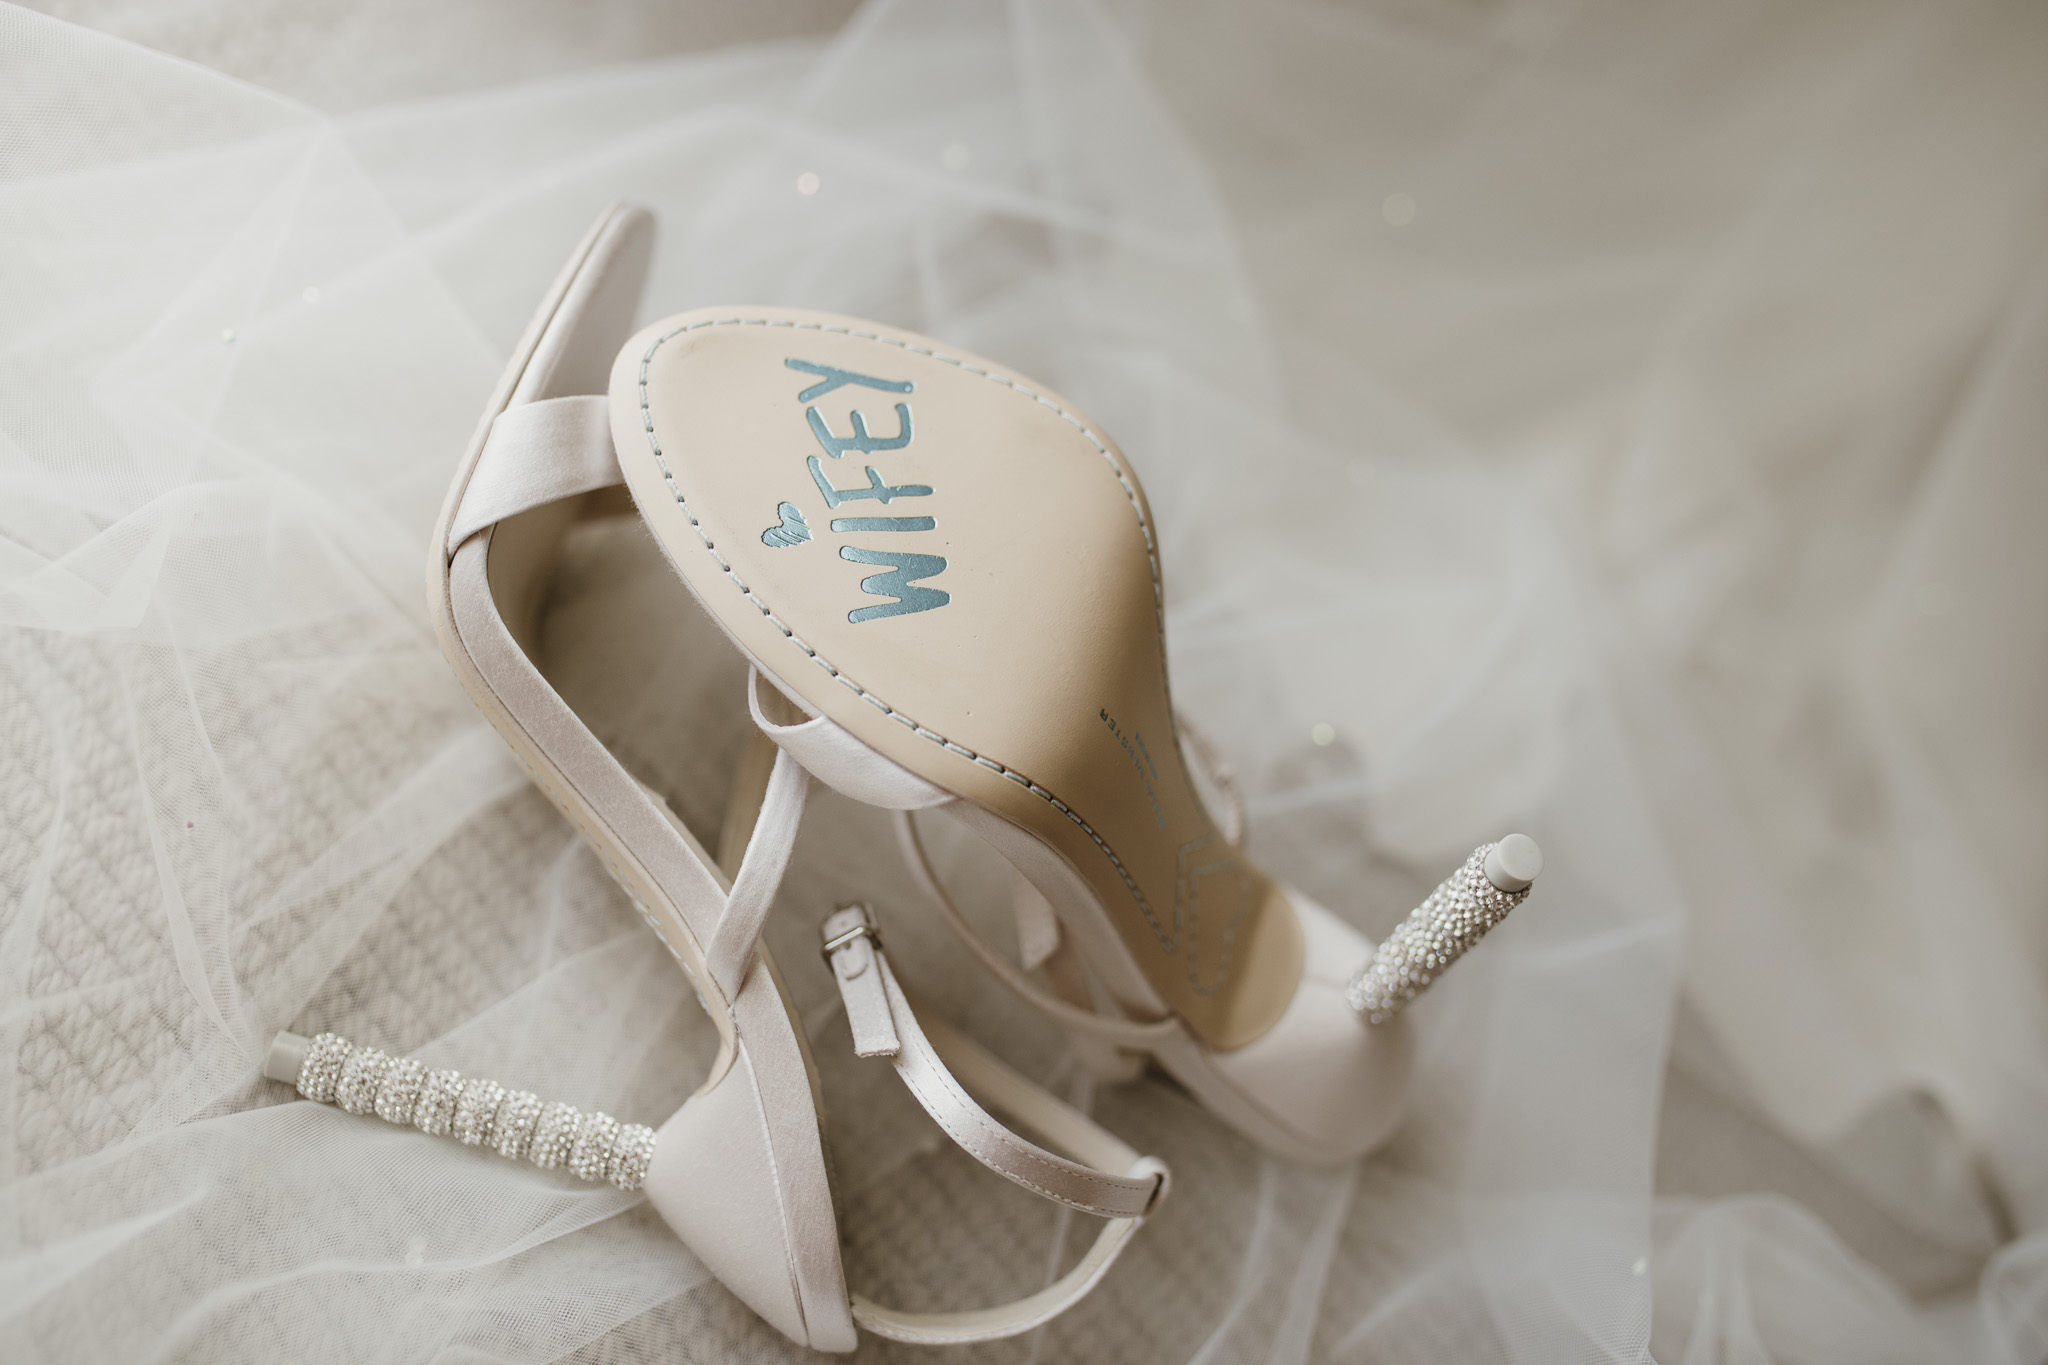 Classy Jimmy Choo Wedding Shoes with Embelishment for your Walk Down the  Isle